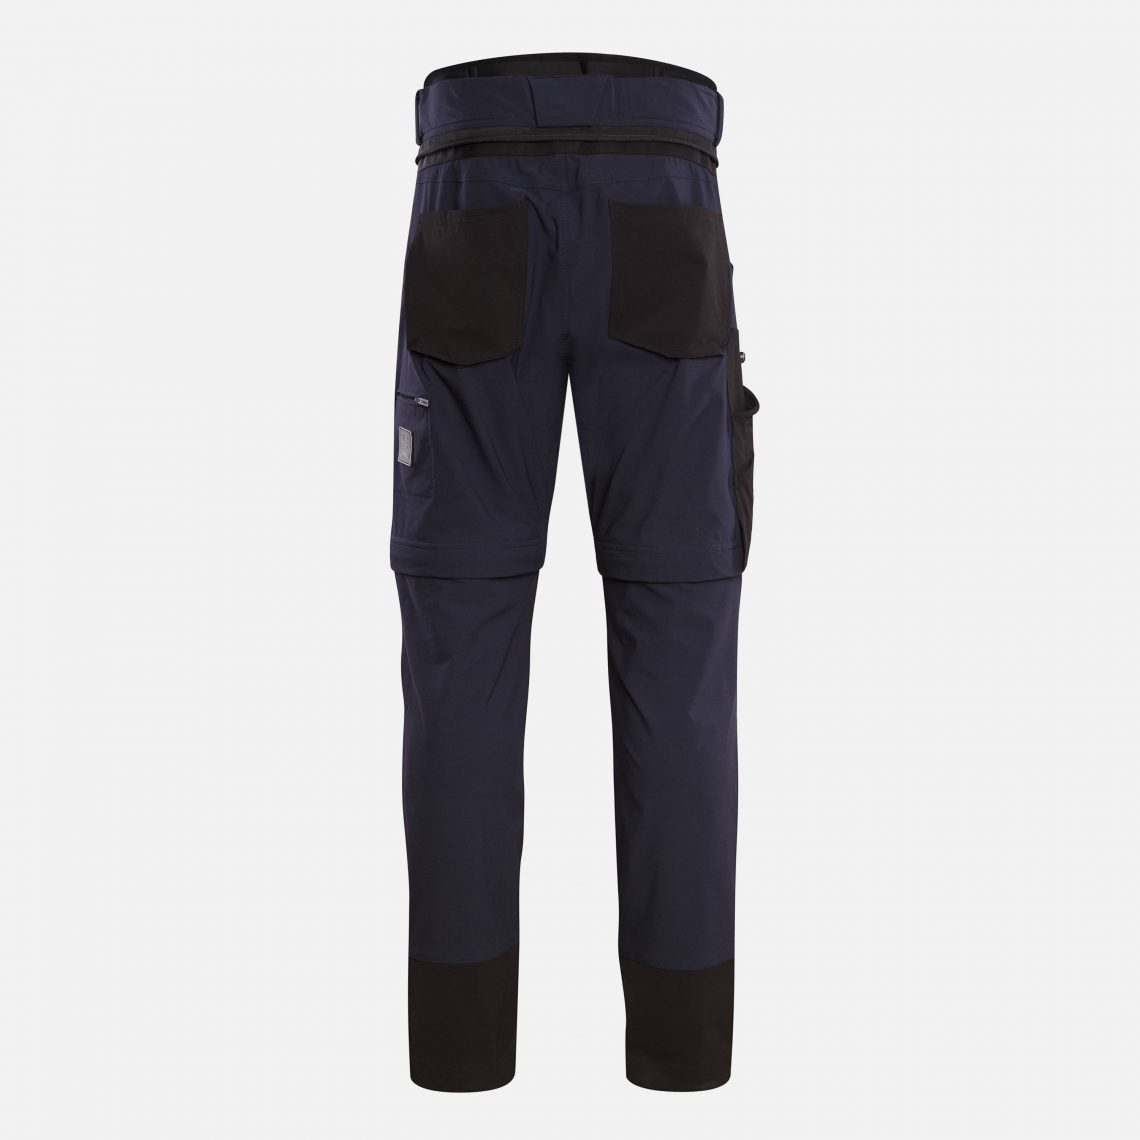 Work trousers modular with stretch